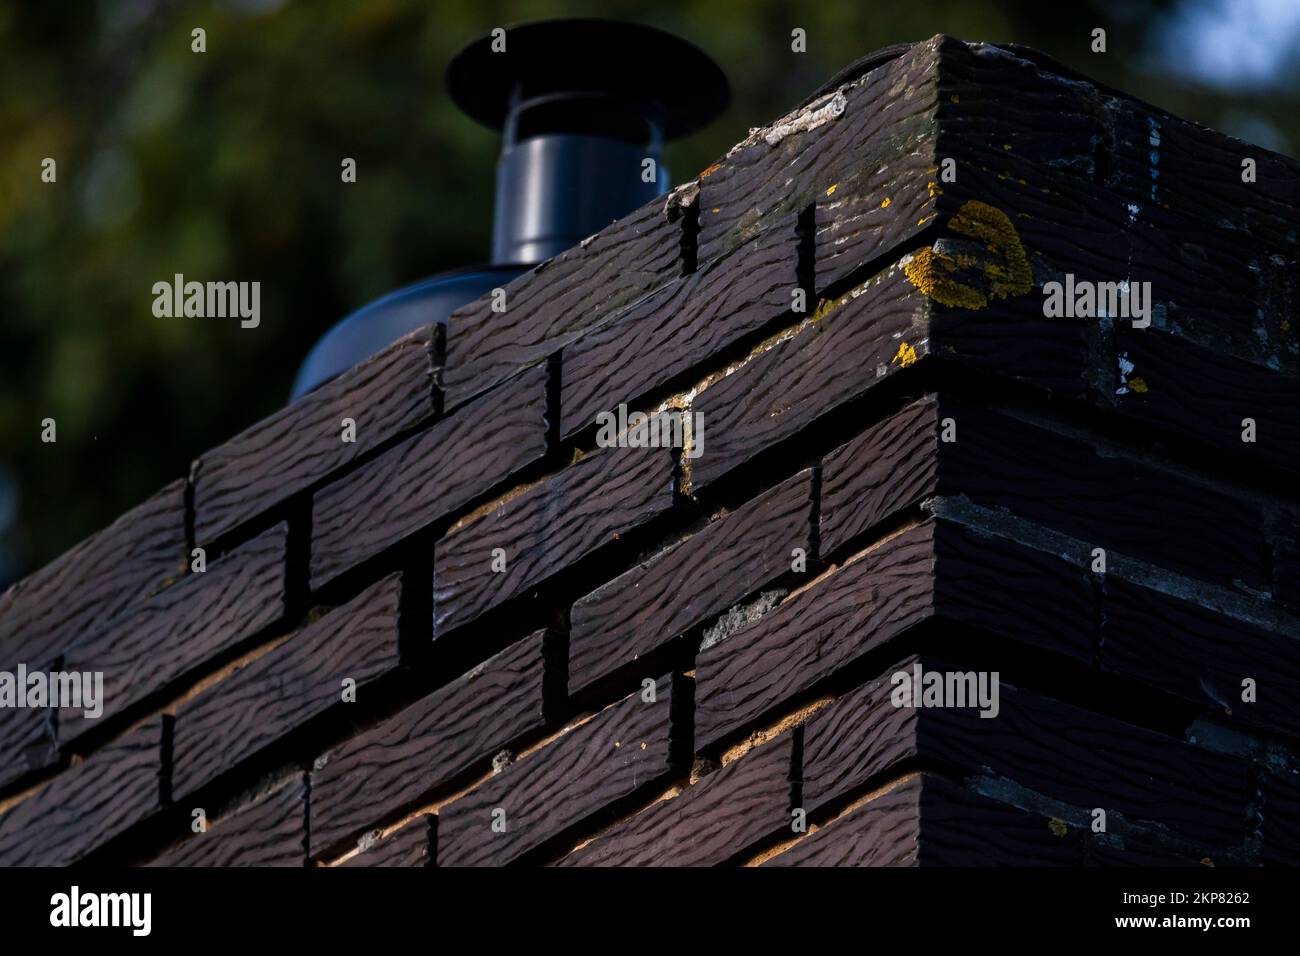 The partial view of a brick wall with a wooden design Stock Photo